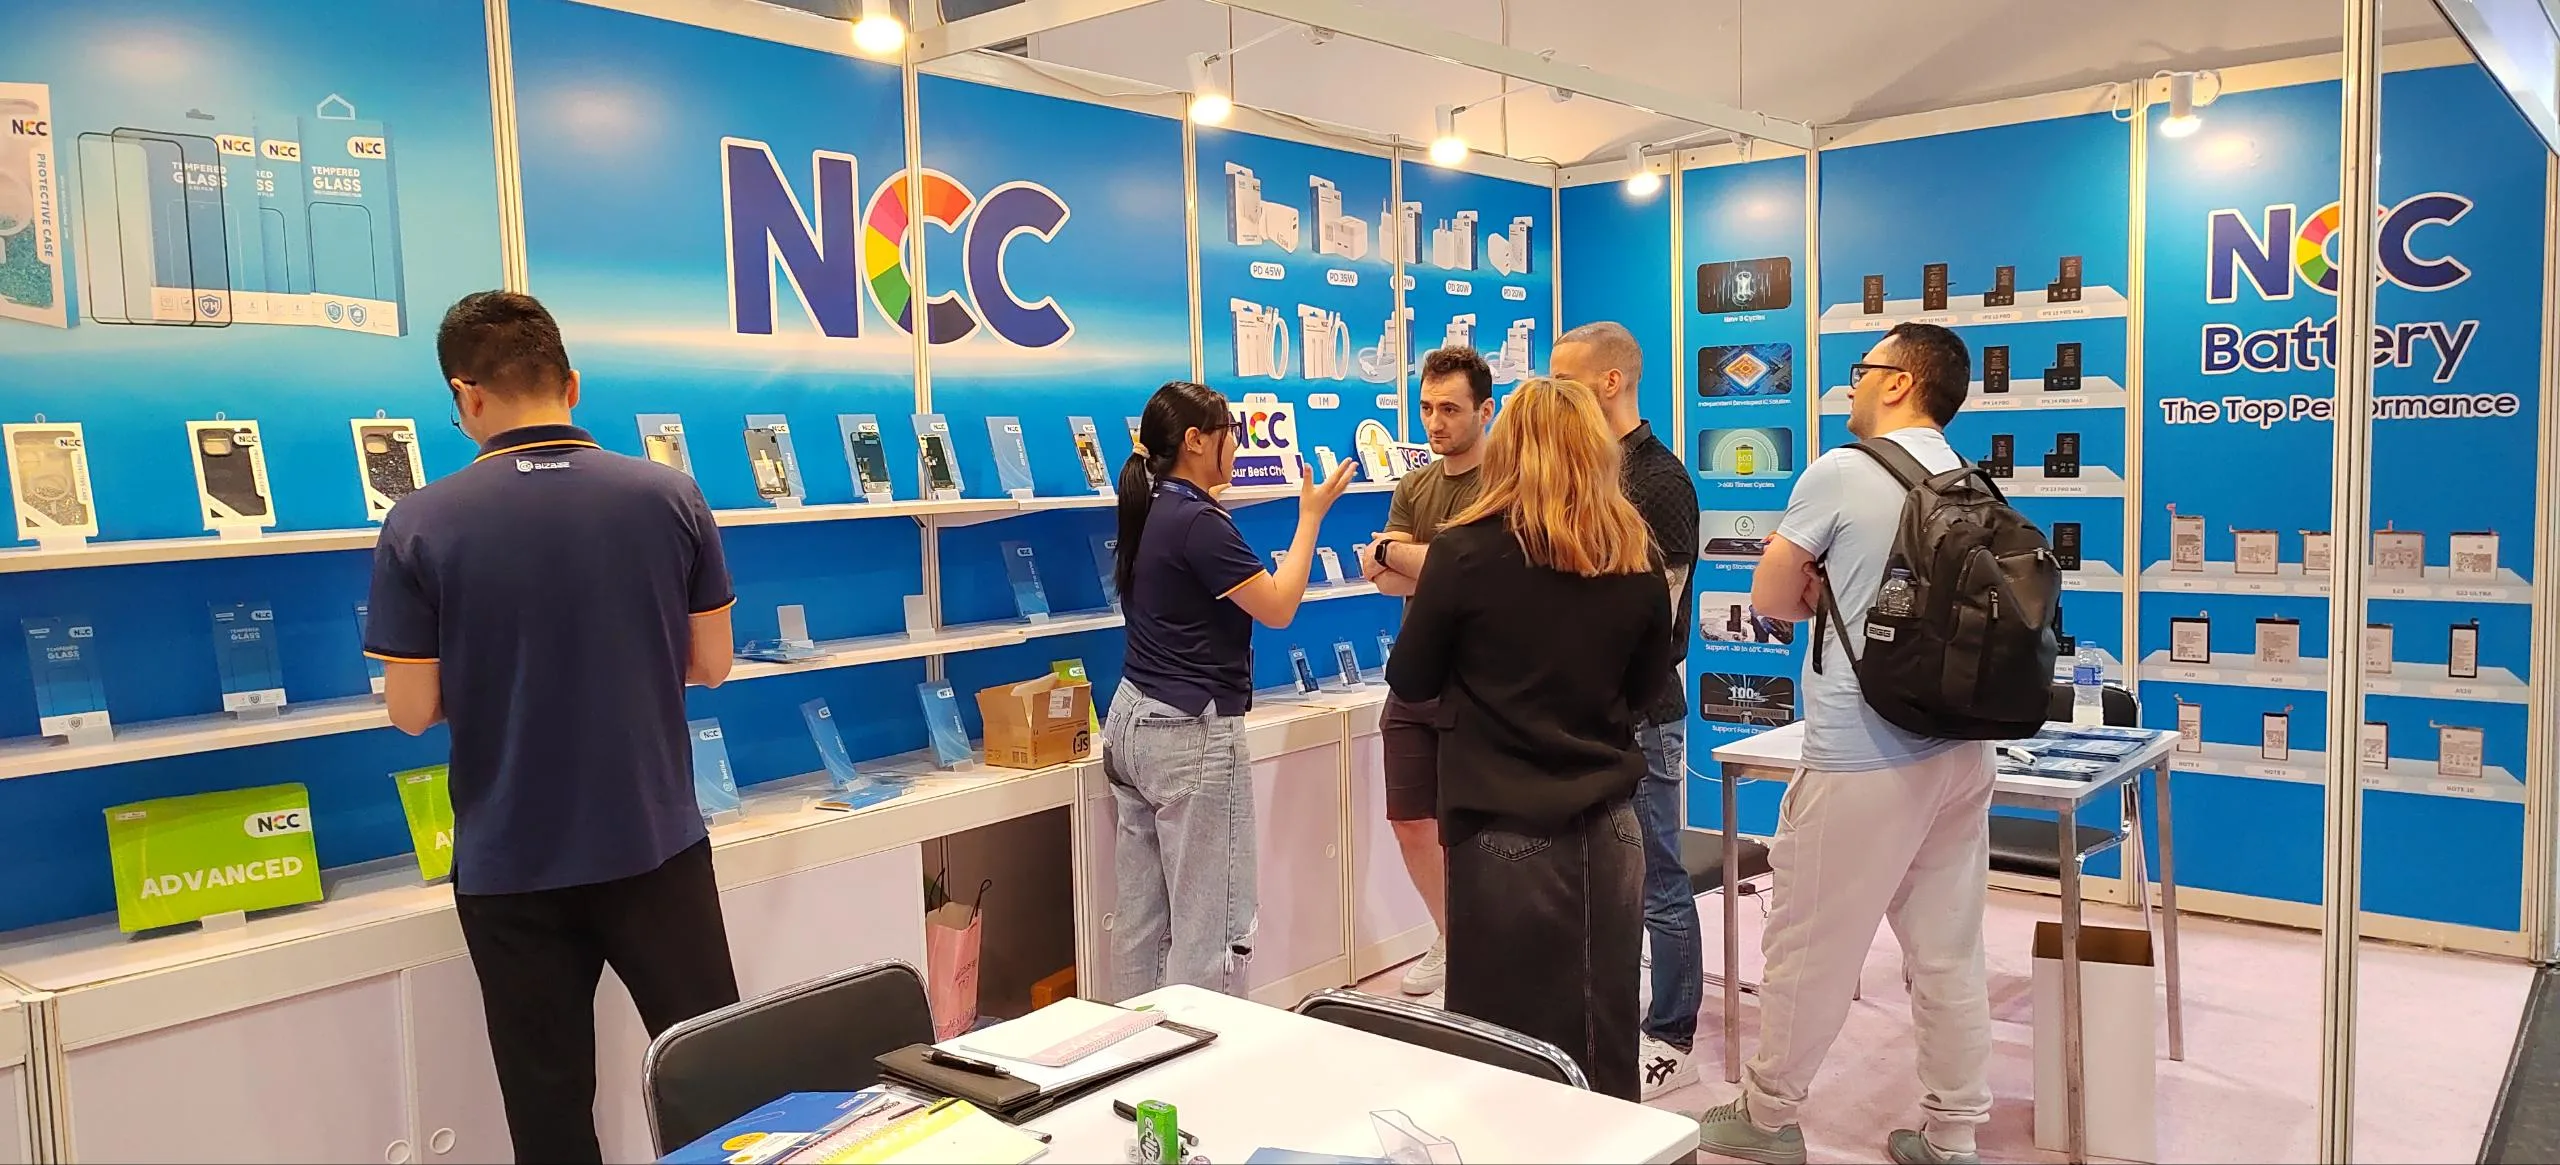 At the show, NCC experts talked with visiting clients.